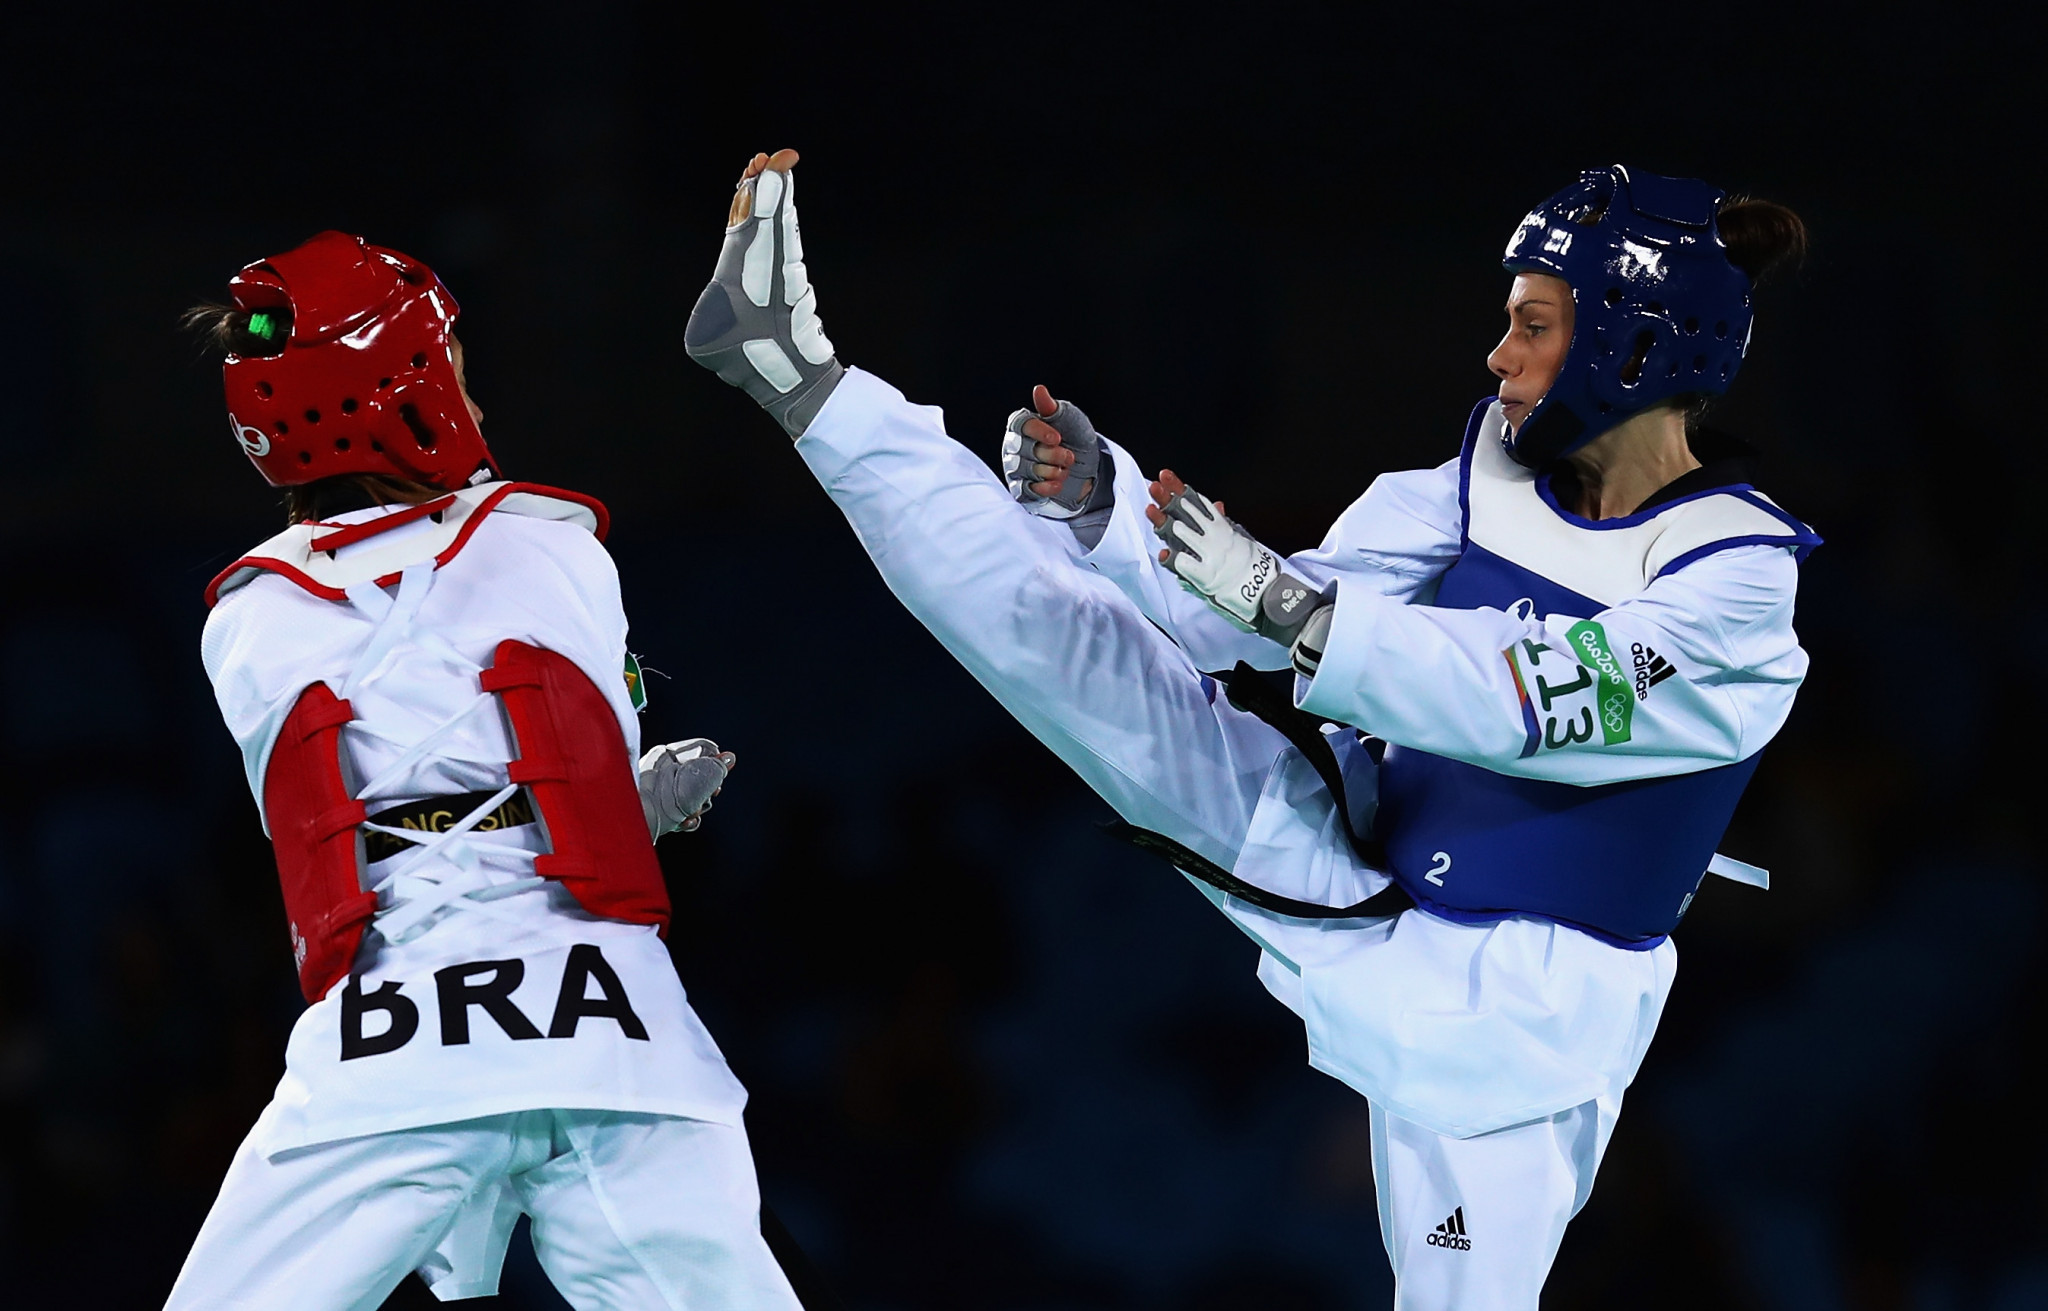 Andrea Kilday was New Zealand's sole taekwondo representative at the Rio 2016 Olympic Games ©Getty Images